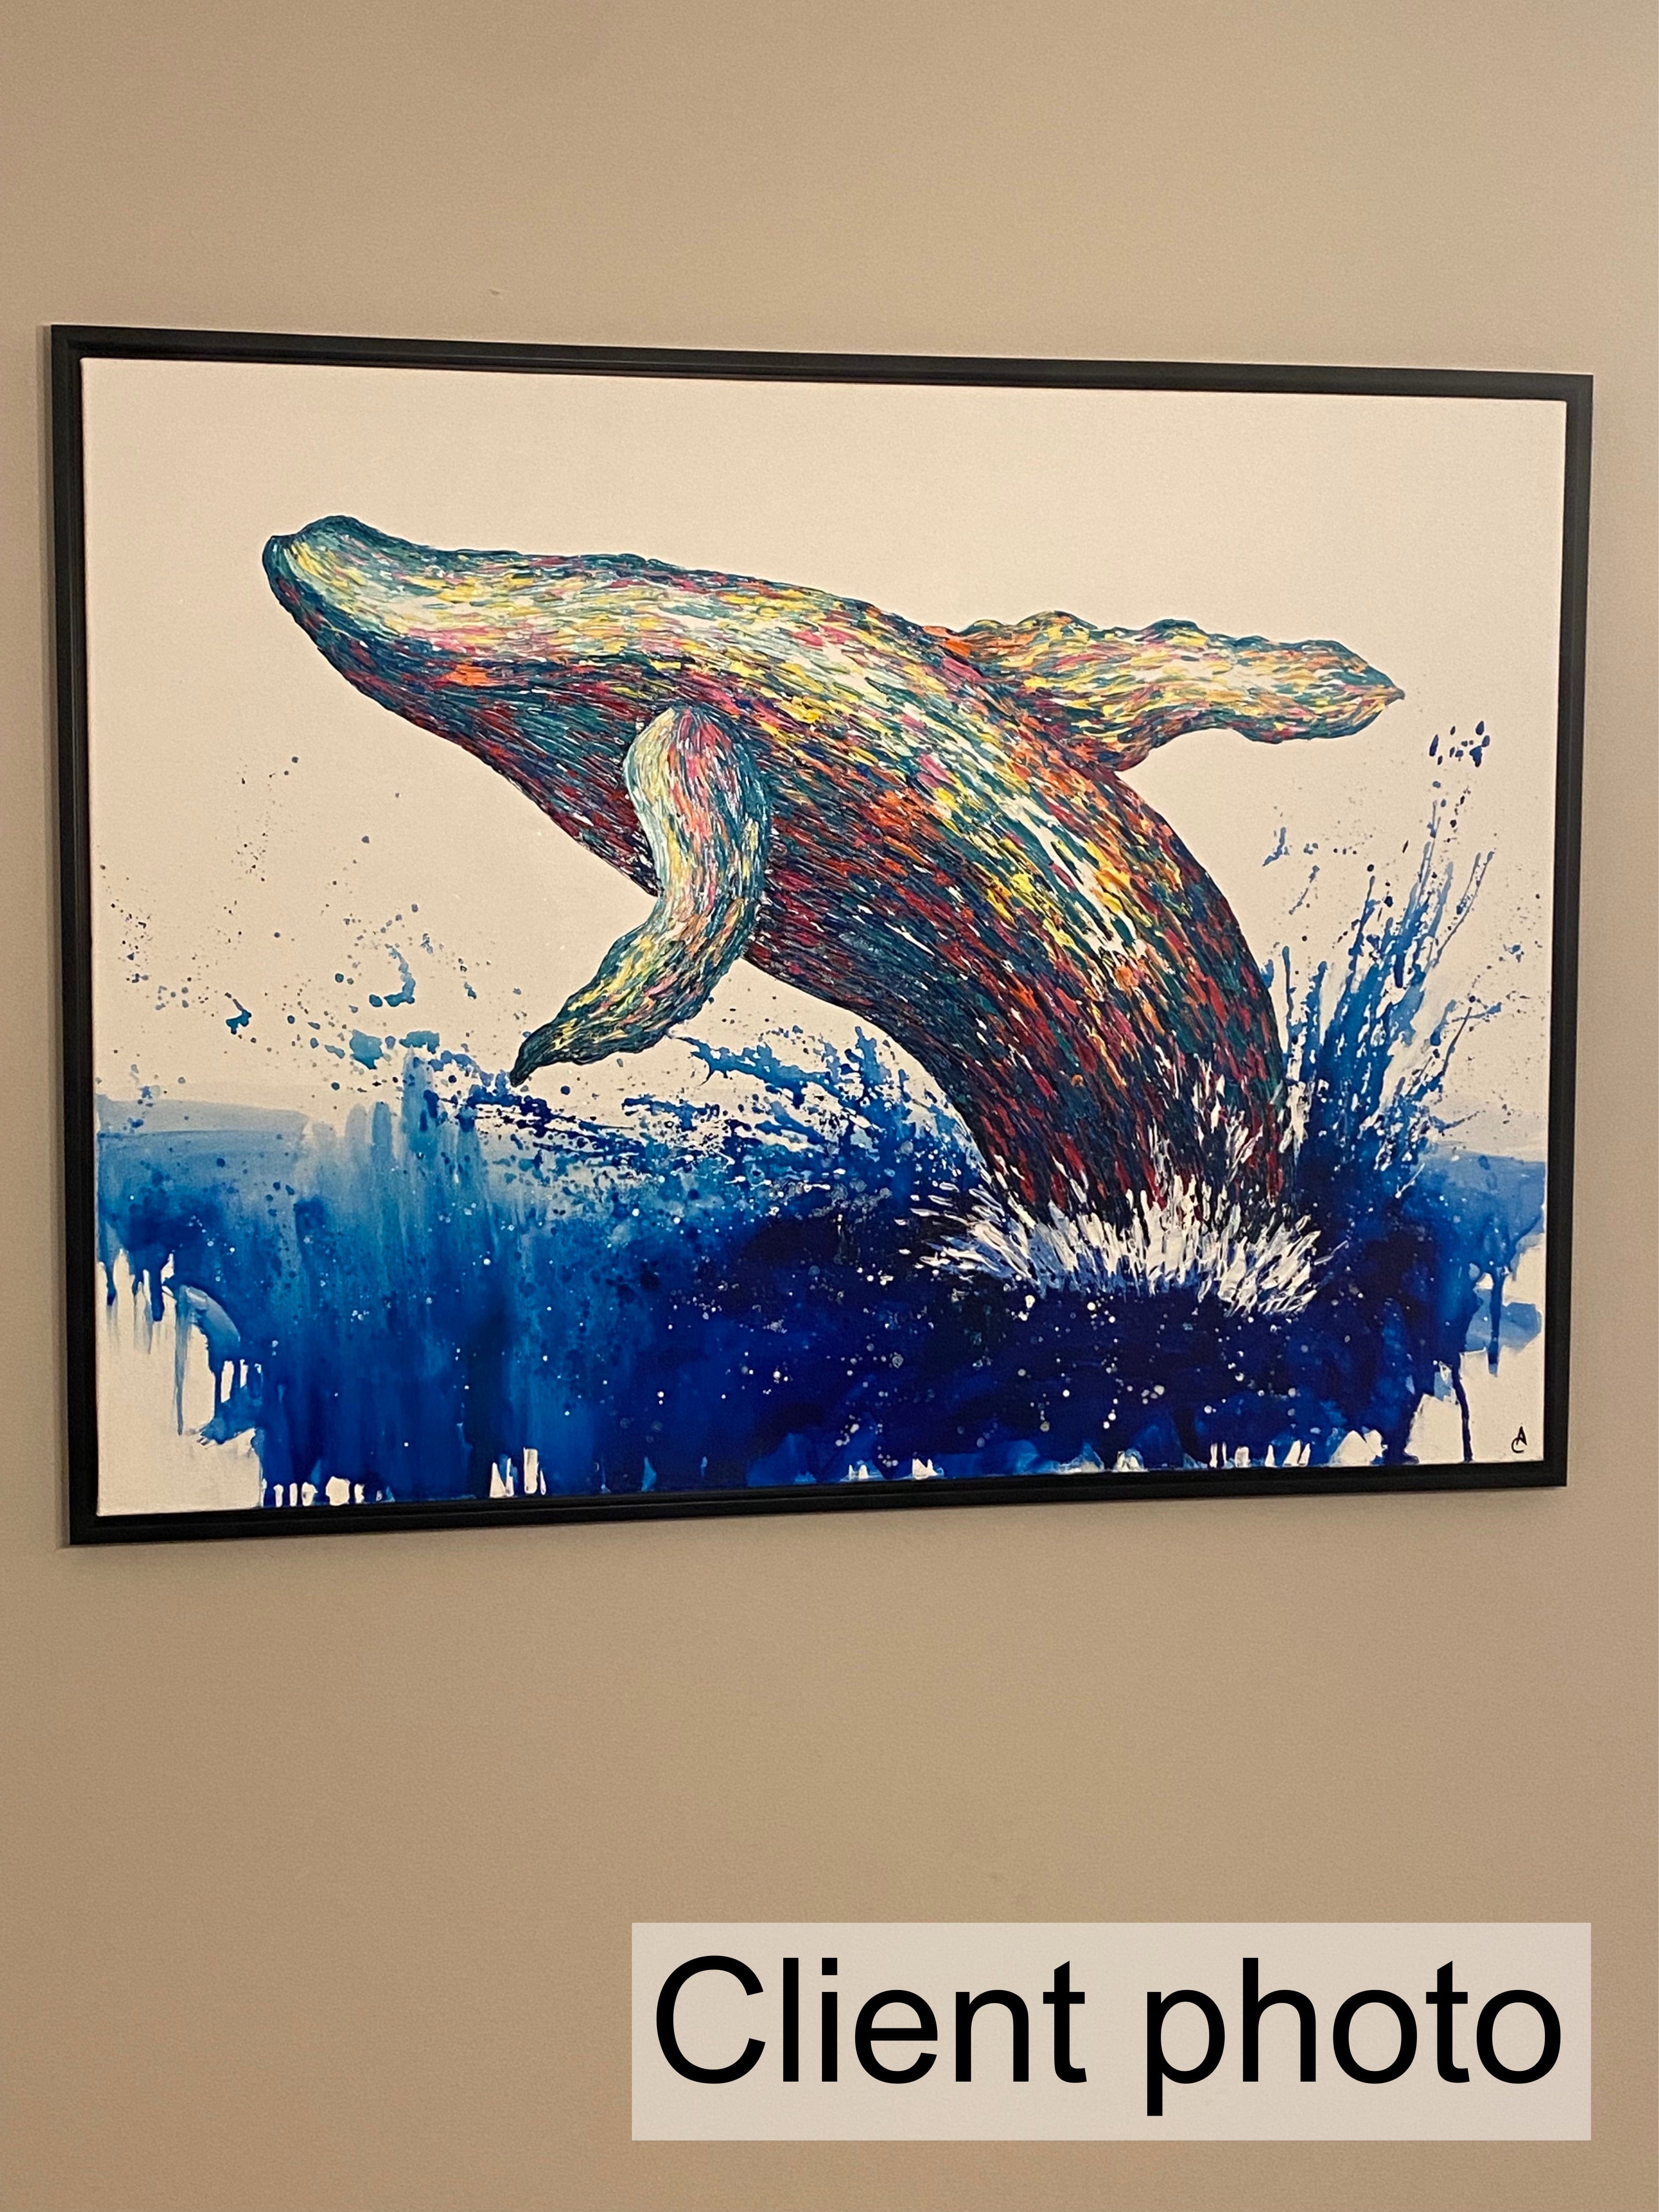 GREAT WHALE